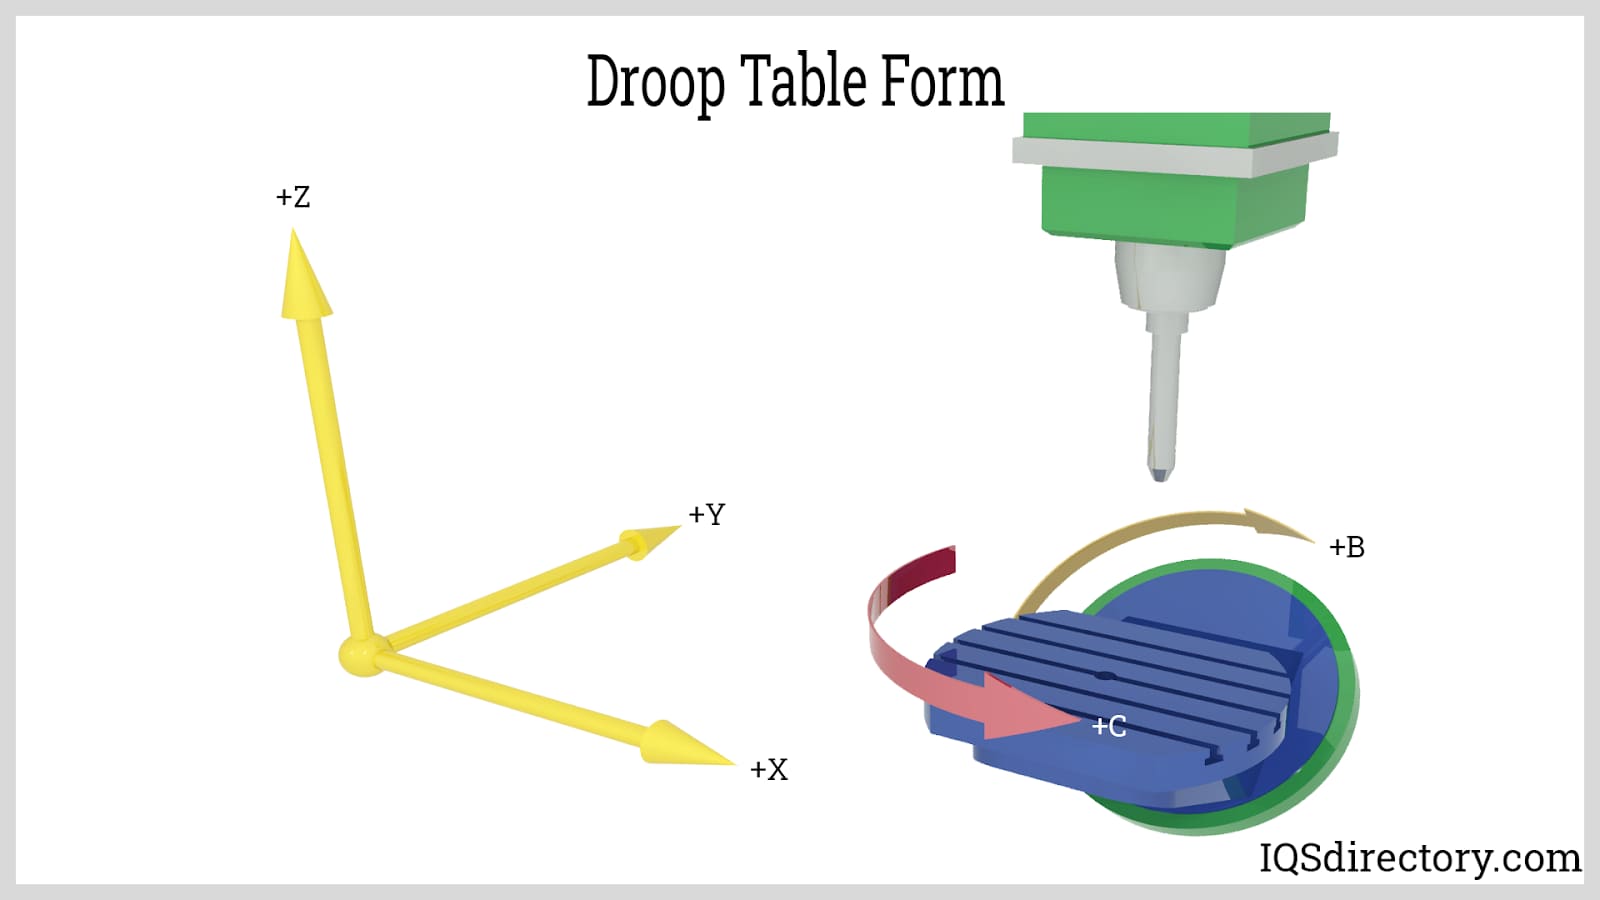 Droop Table Form